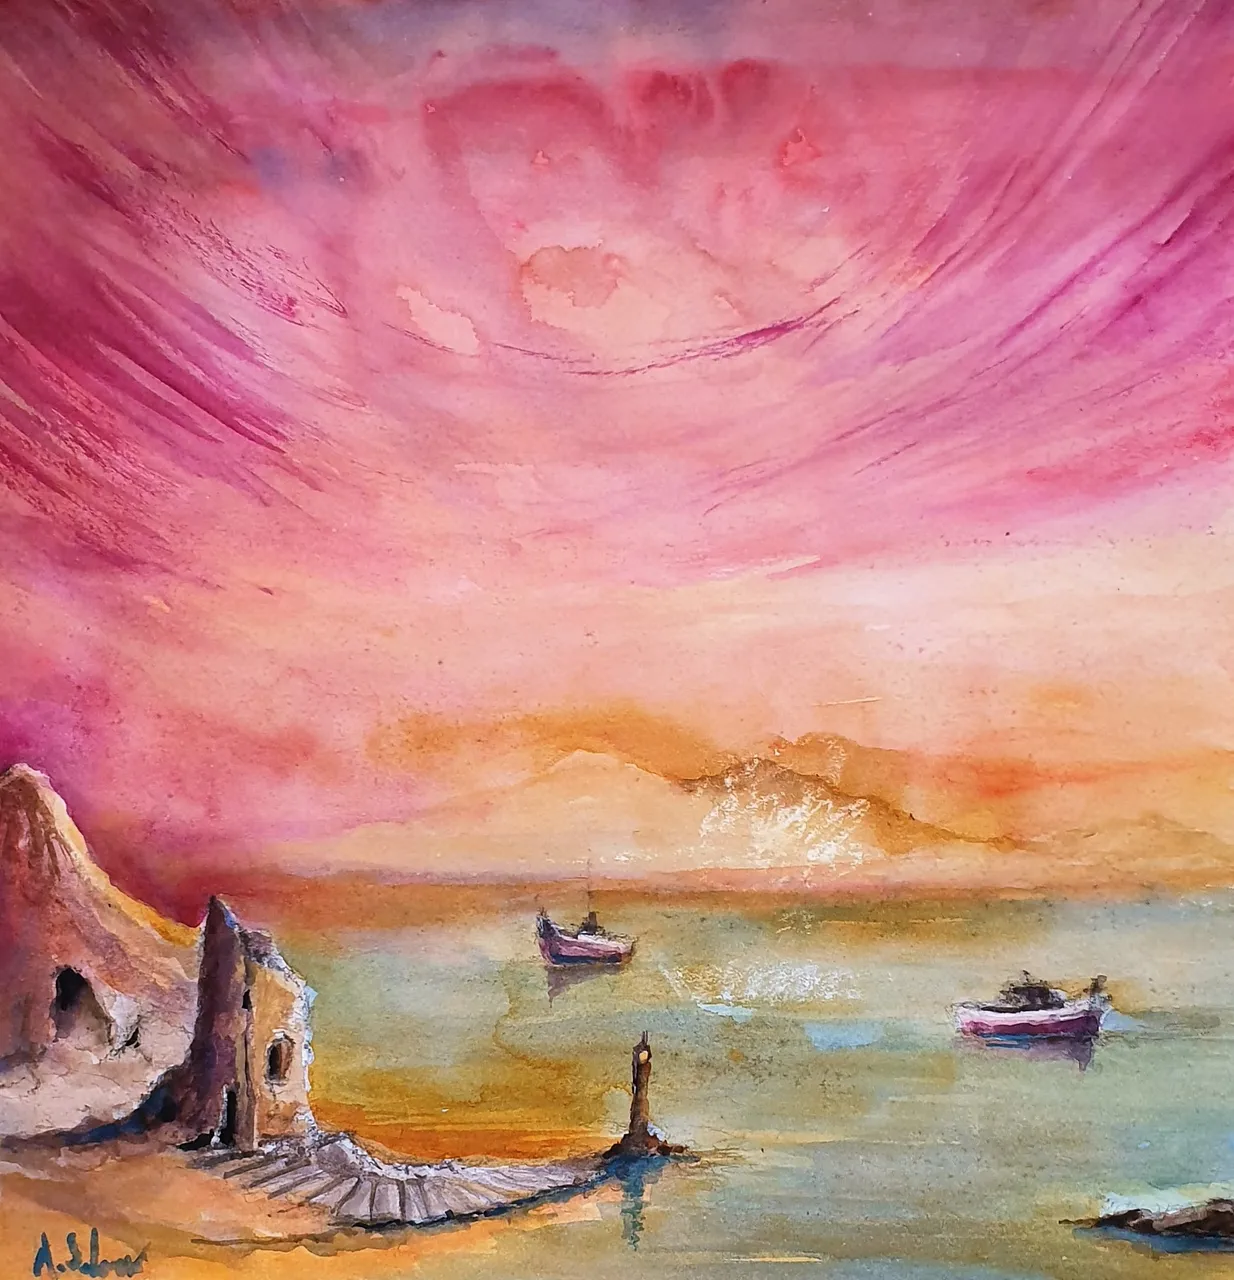 A surreal red sunset - watercolor on paper